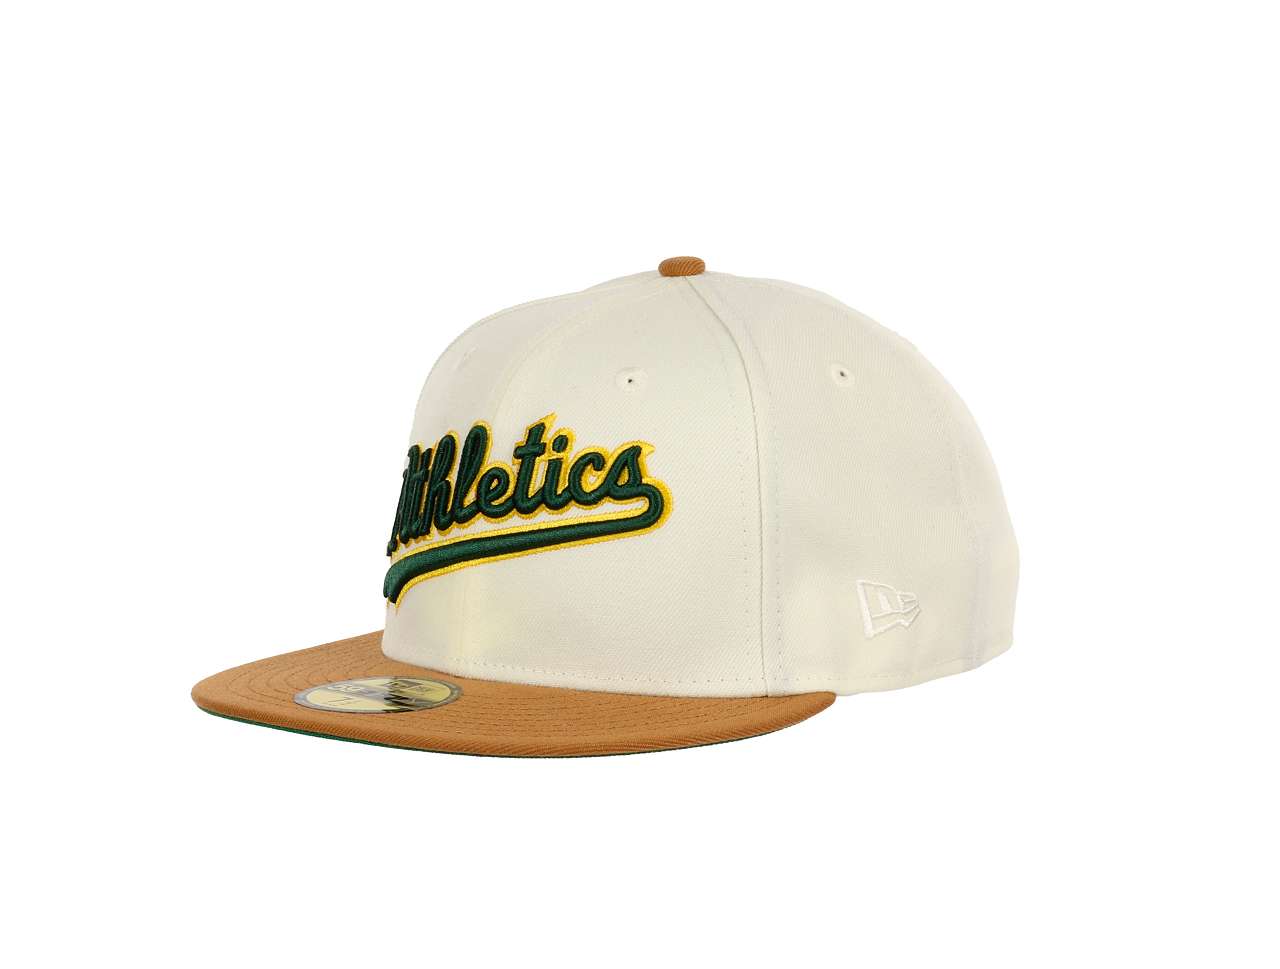 Oakland Athletics MLB Two Tone Cooperstown Athletics Sidepatch Chrome 59Fifty Basecap New Era